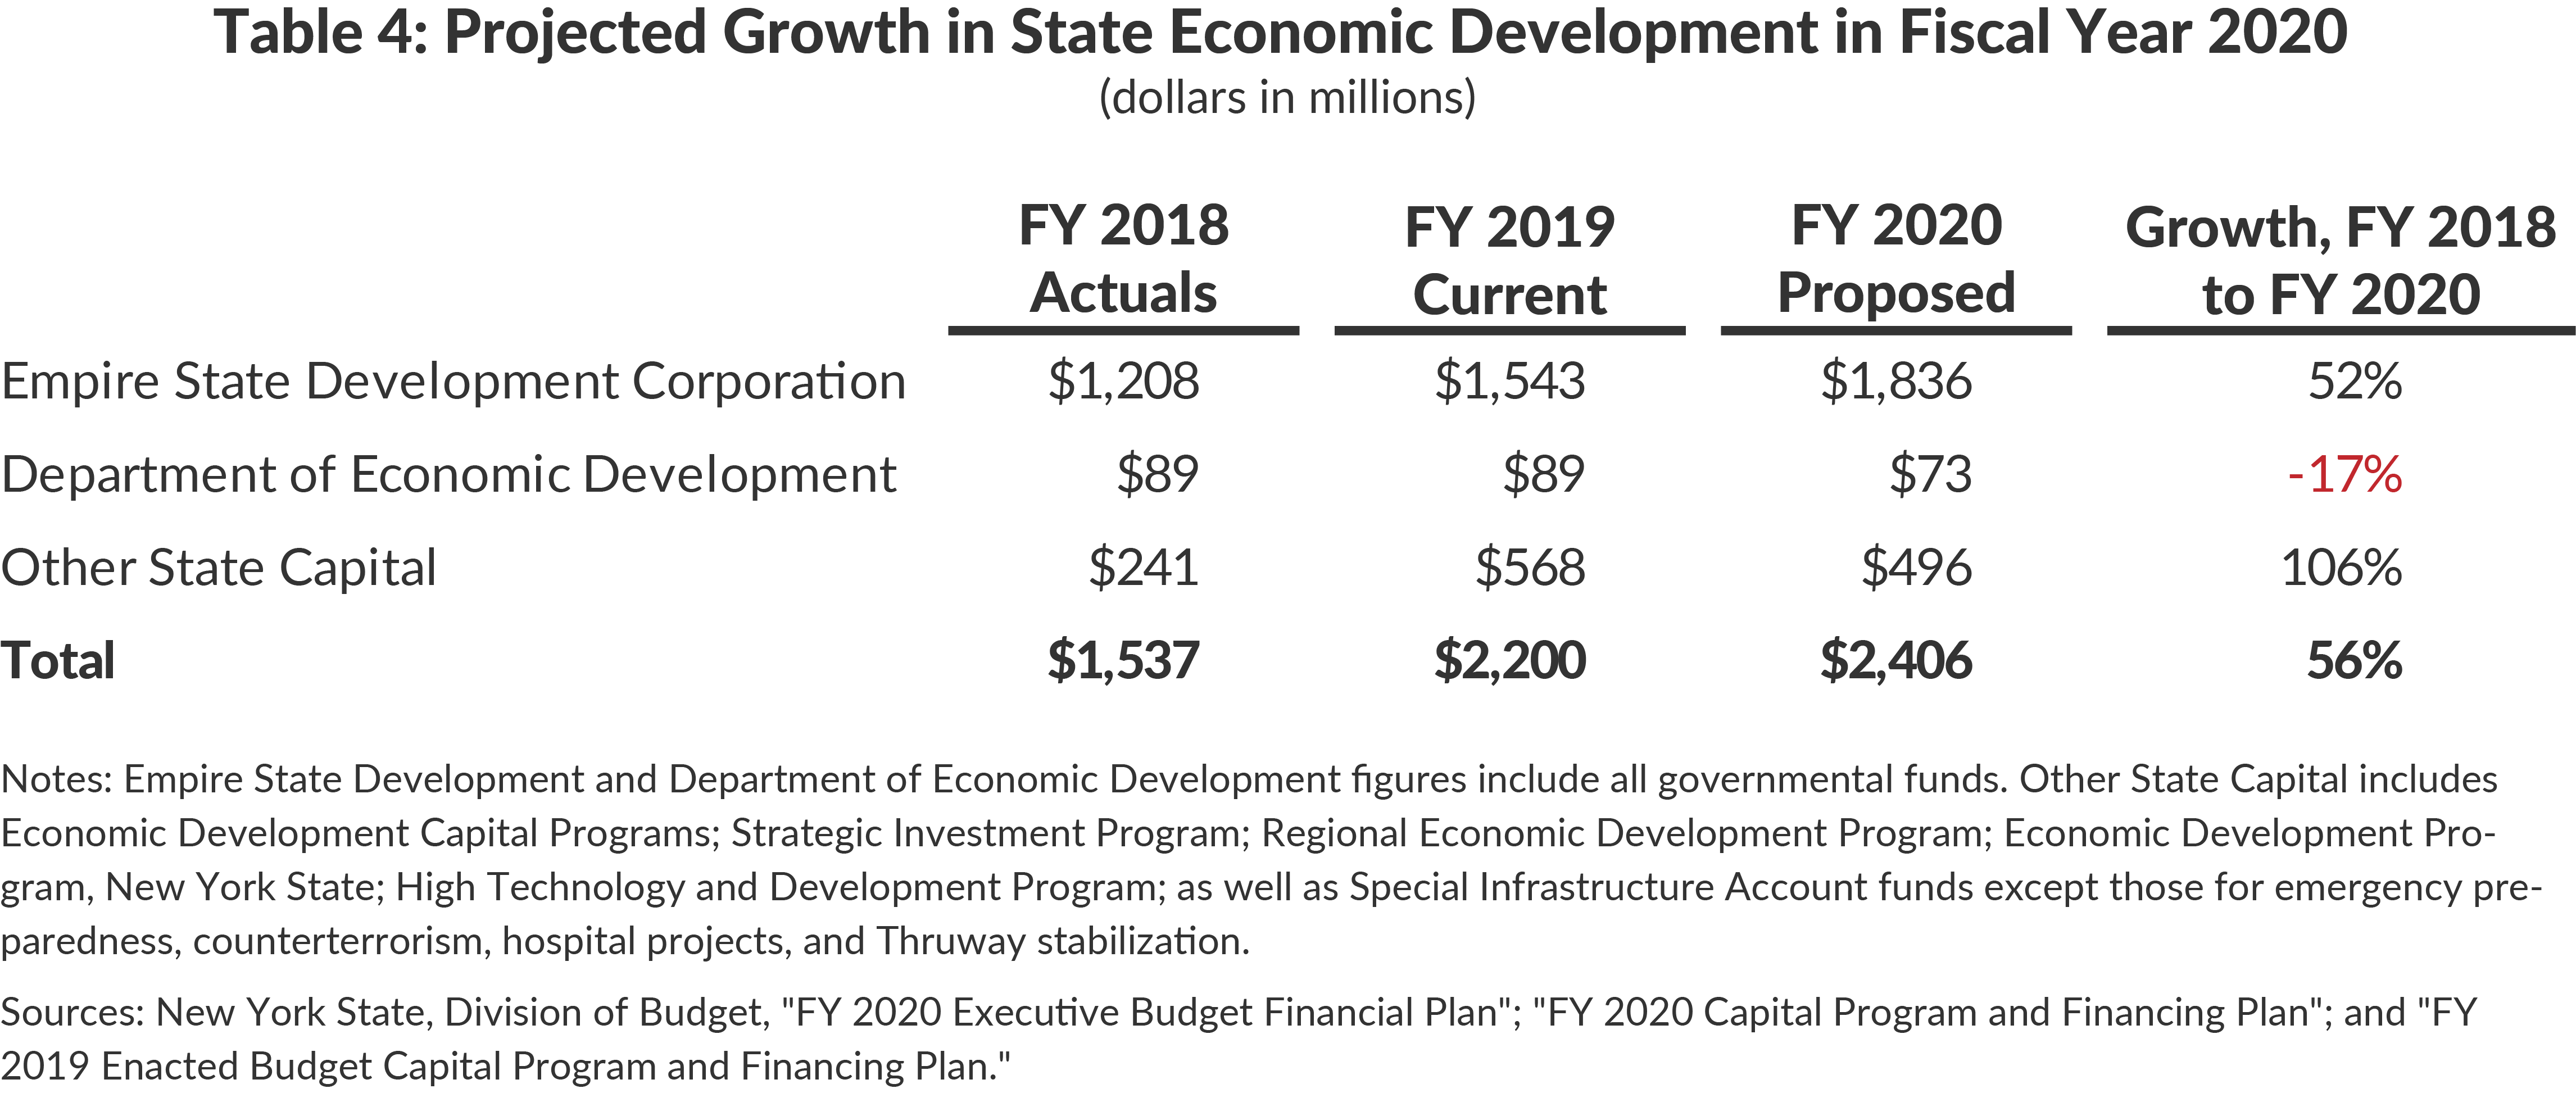 Table 4: Projected Growth in State Economic Development in Fiscal Year 2020